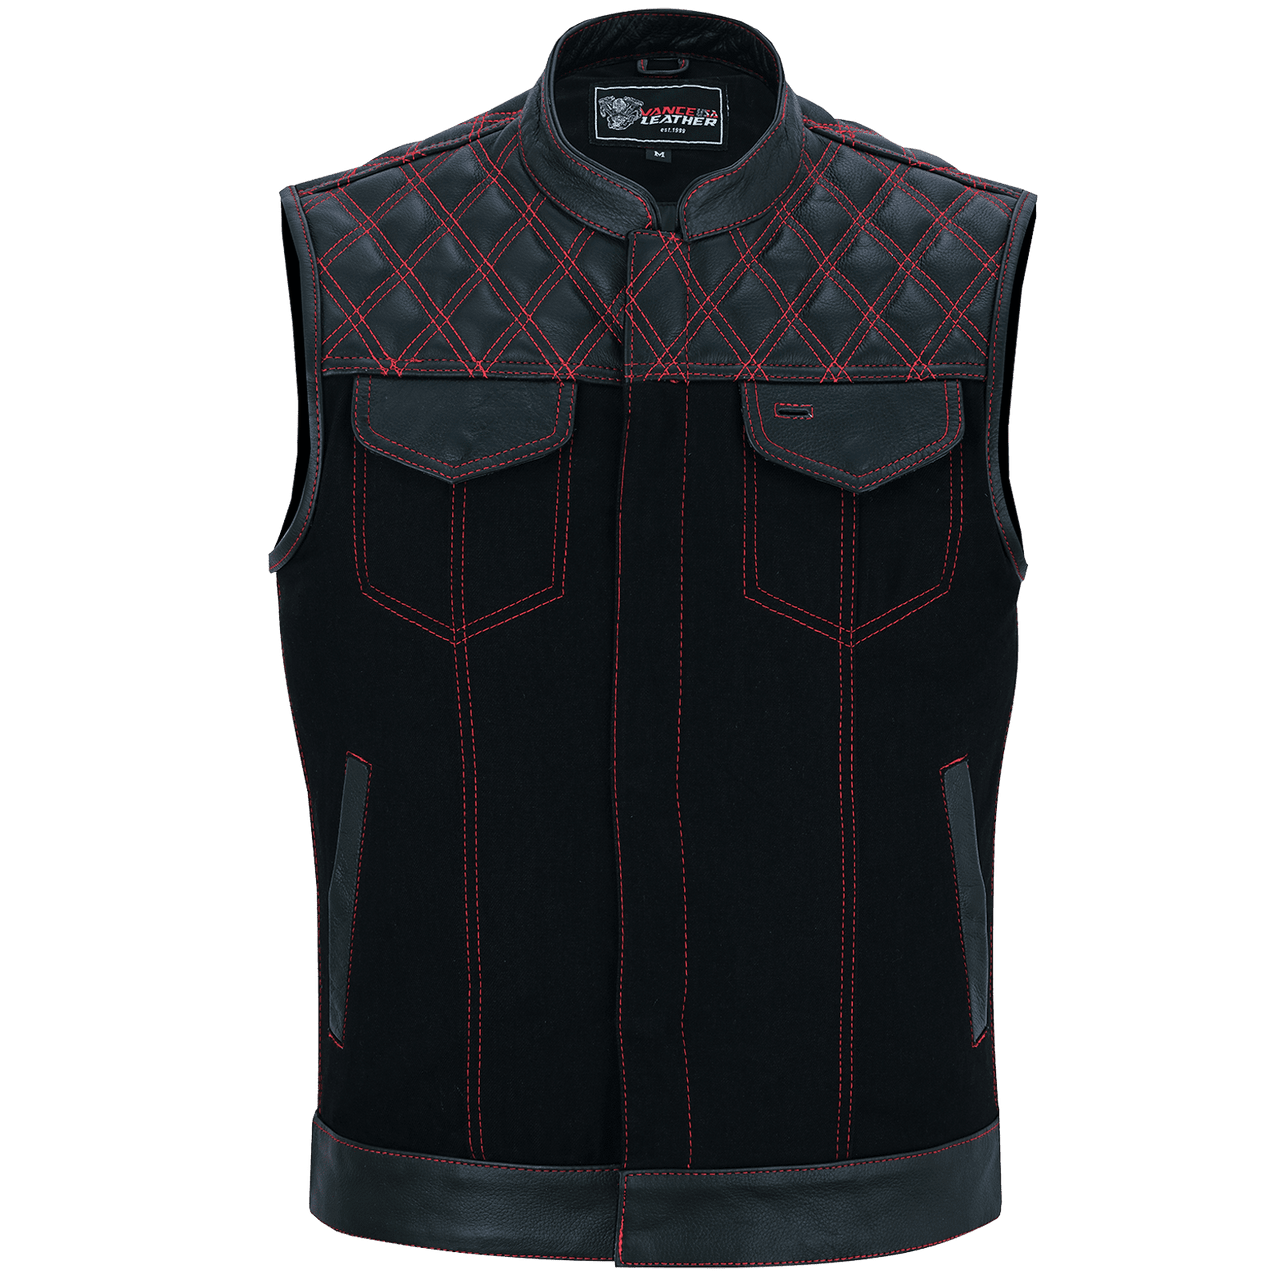 Men's Denim & Leather Motorcycle Vest with Conceal Carry Pockets and Red  Stitching.